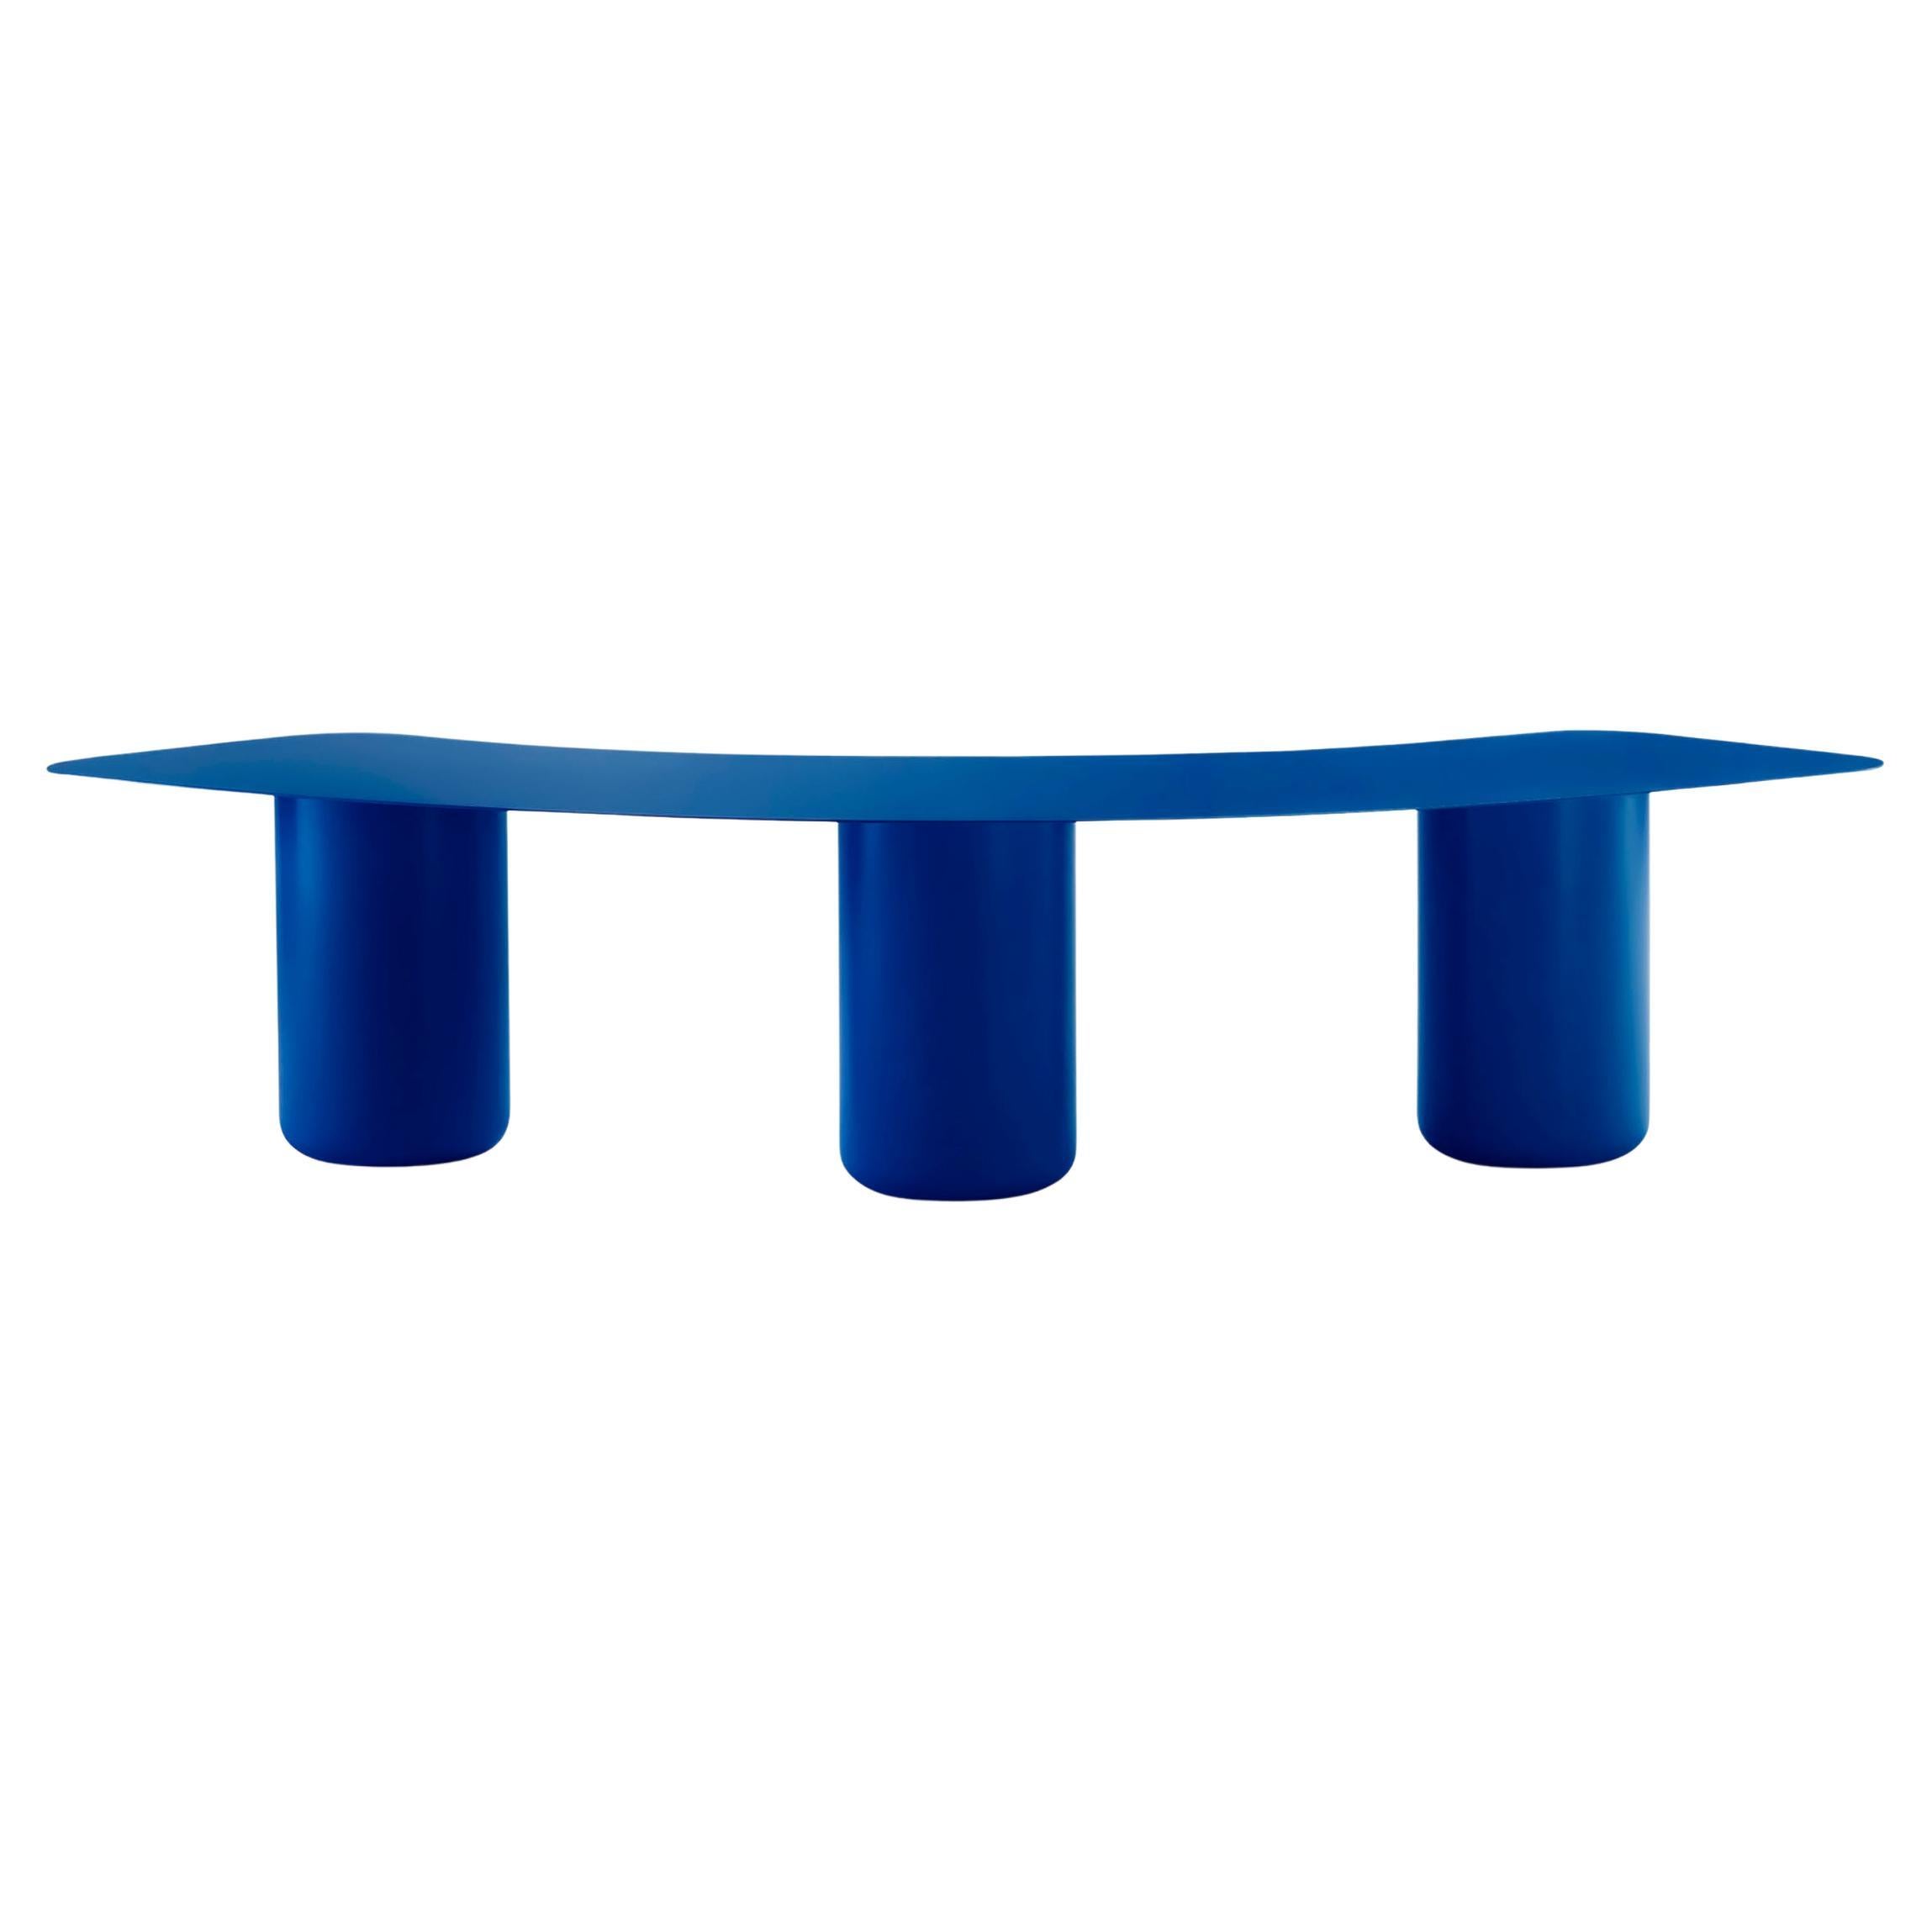 Small Vivid Blue Curved Bench by Coco Flip